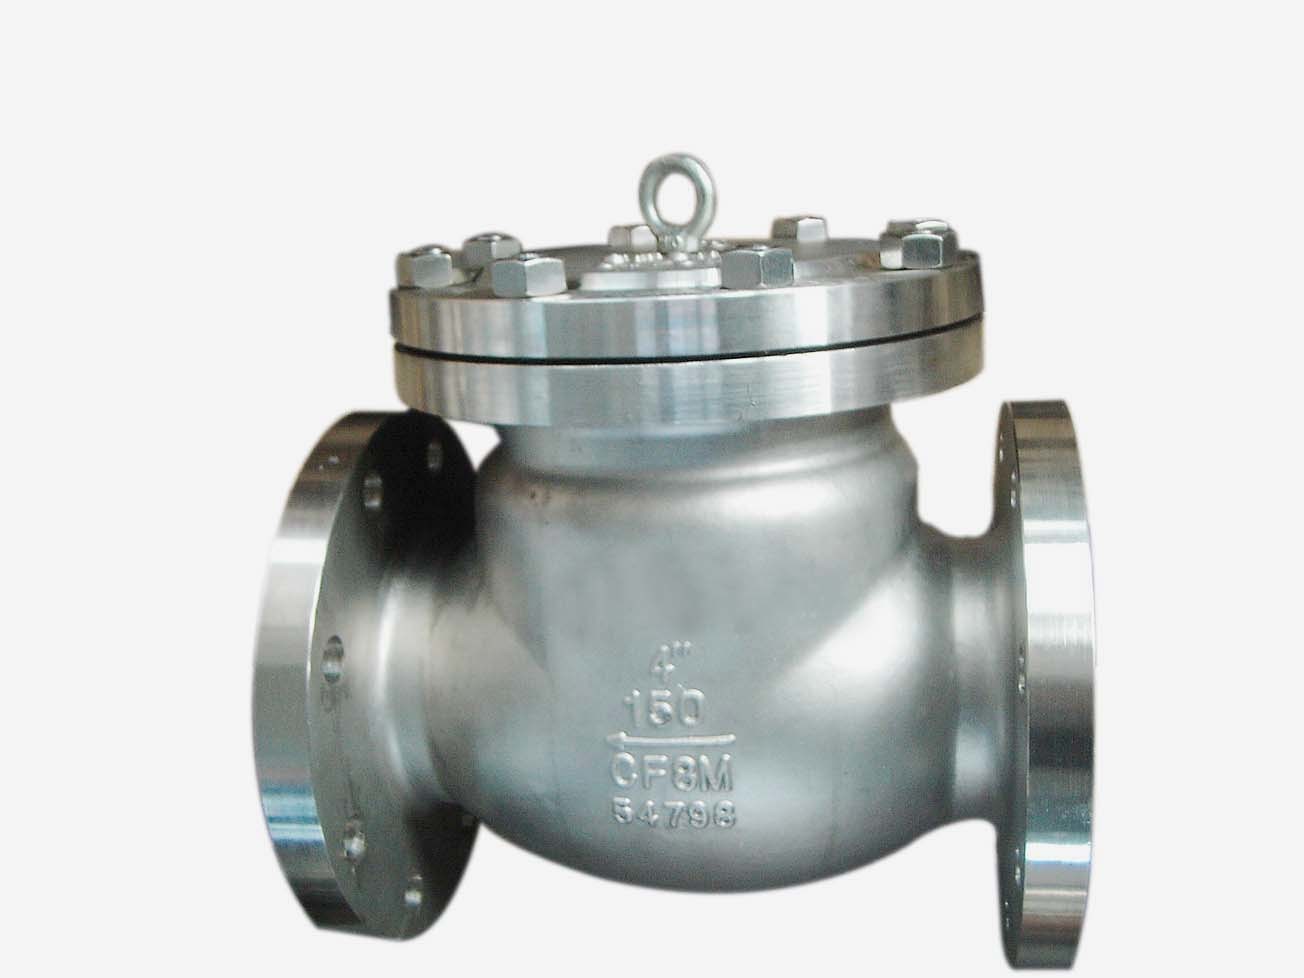 API Swing Stainless Steel Flange Check Valve (H44W)